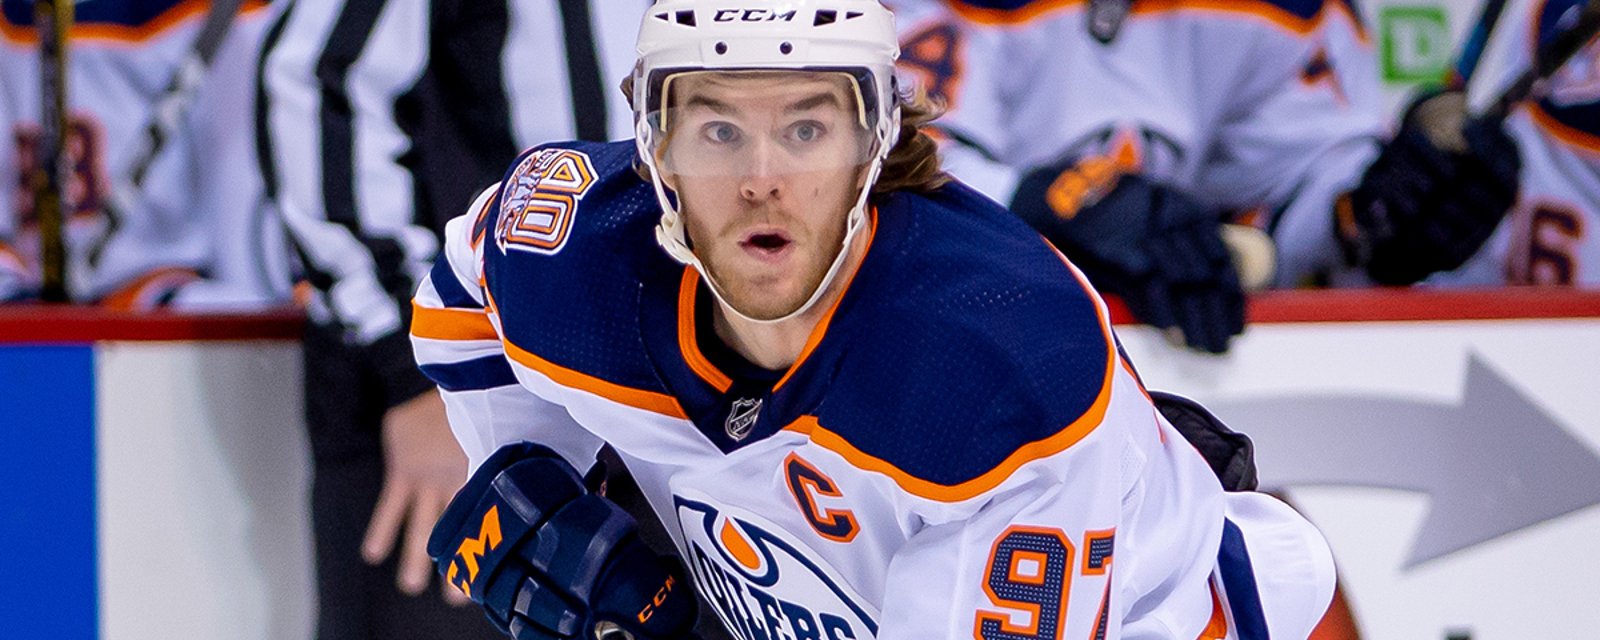 Breaking: Good news for McDavid and Oilers ahead of game against Isles